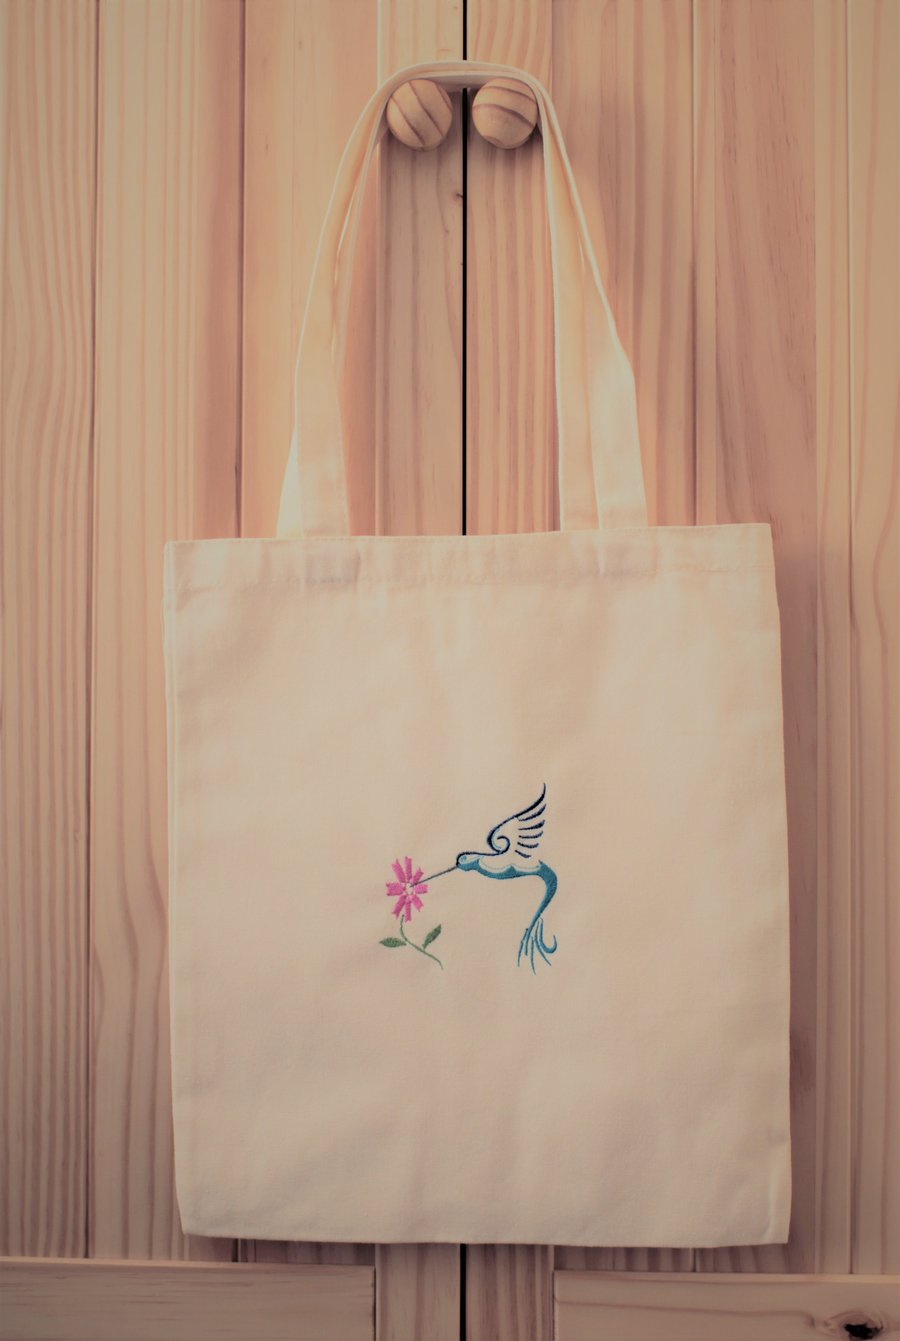 Humming bird machine embroidered on a cream tote bag